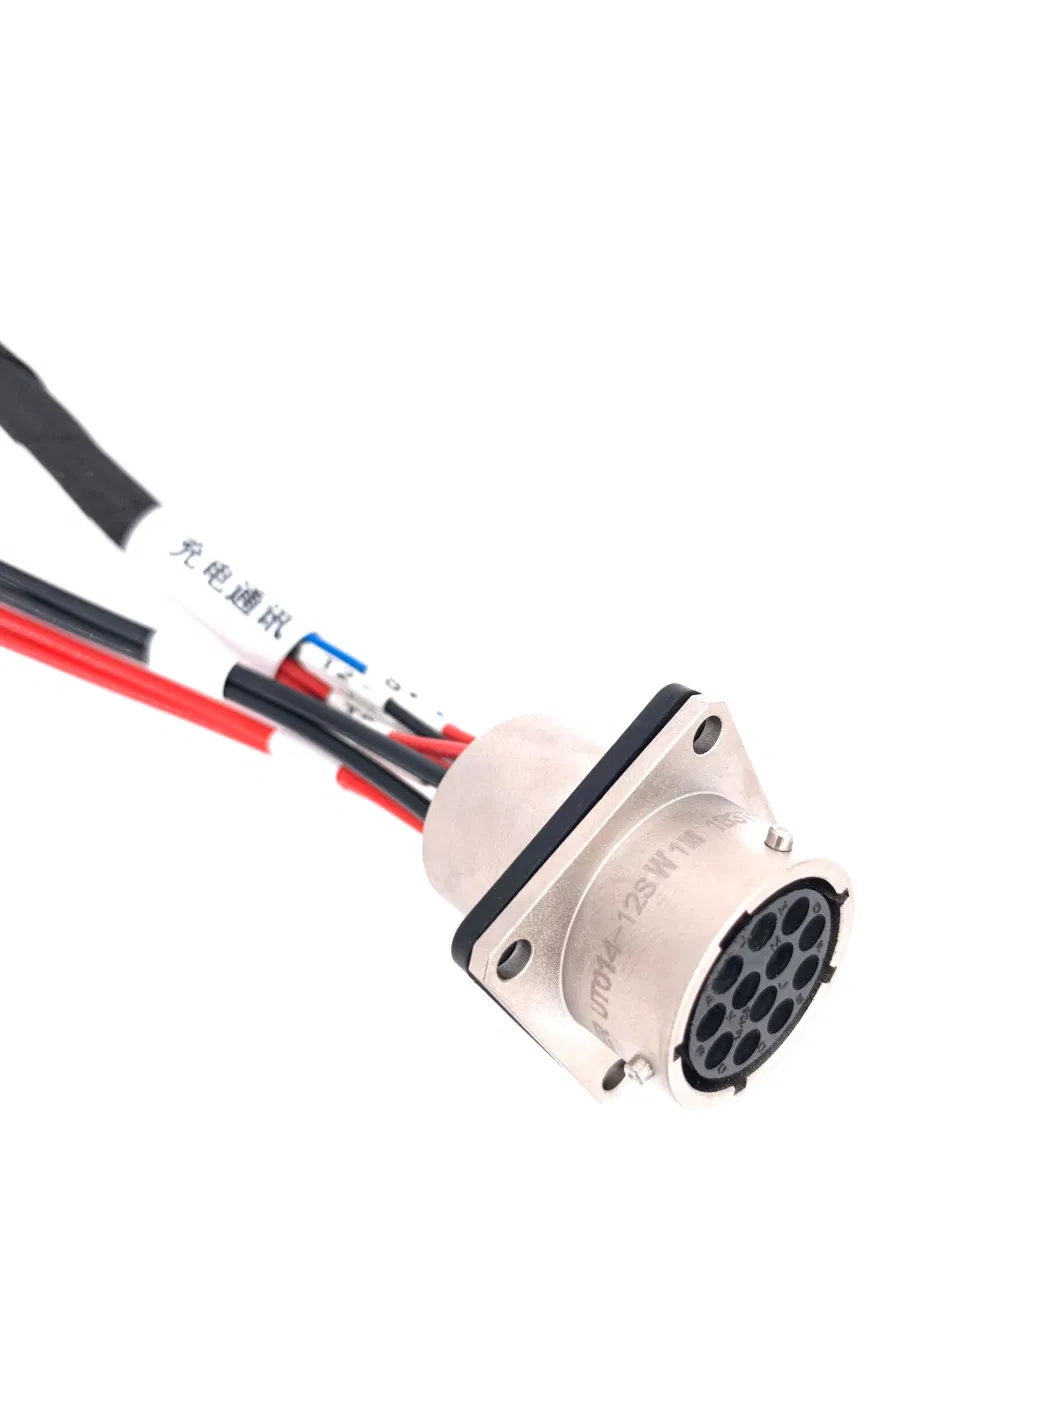 Customized Ship Cable Wiring Harness Marine Energy Storage Cable Cable with Qinke Connector and Tubular Crimping Terminal High Temperature Wire Harness 1332